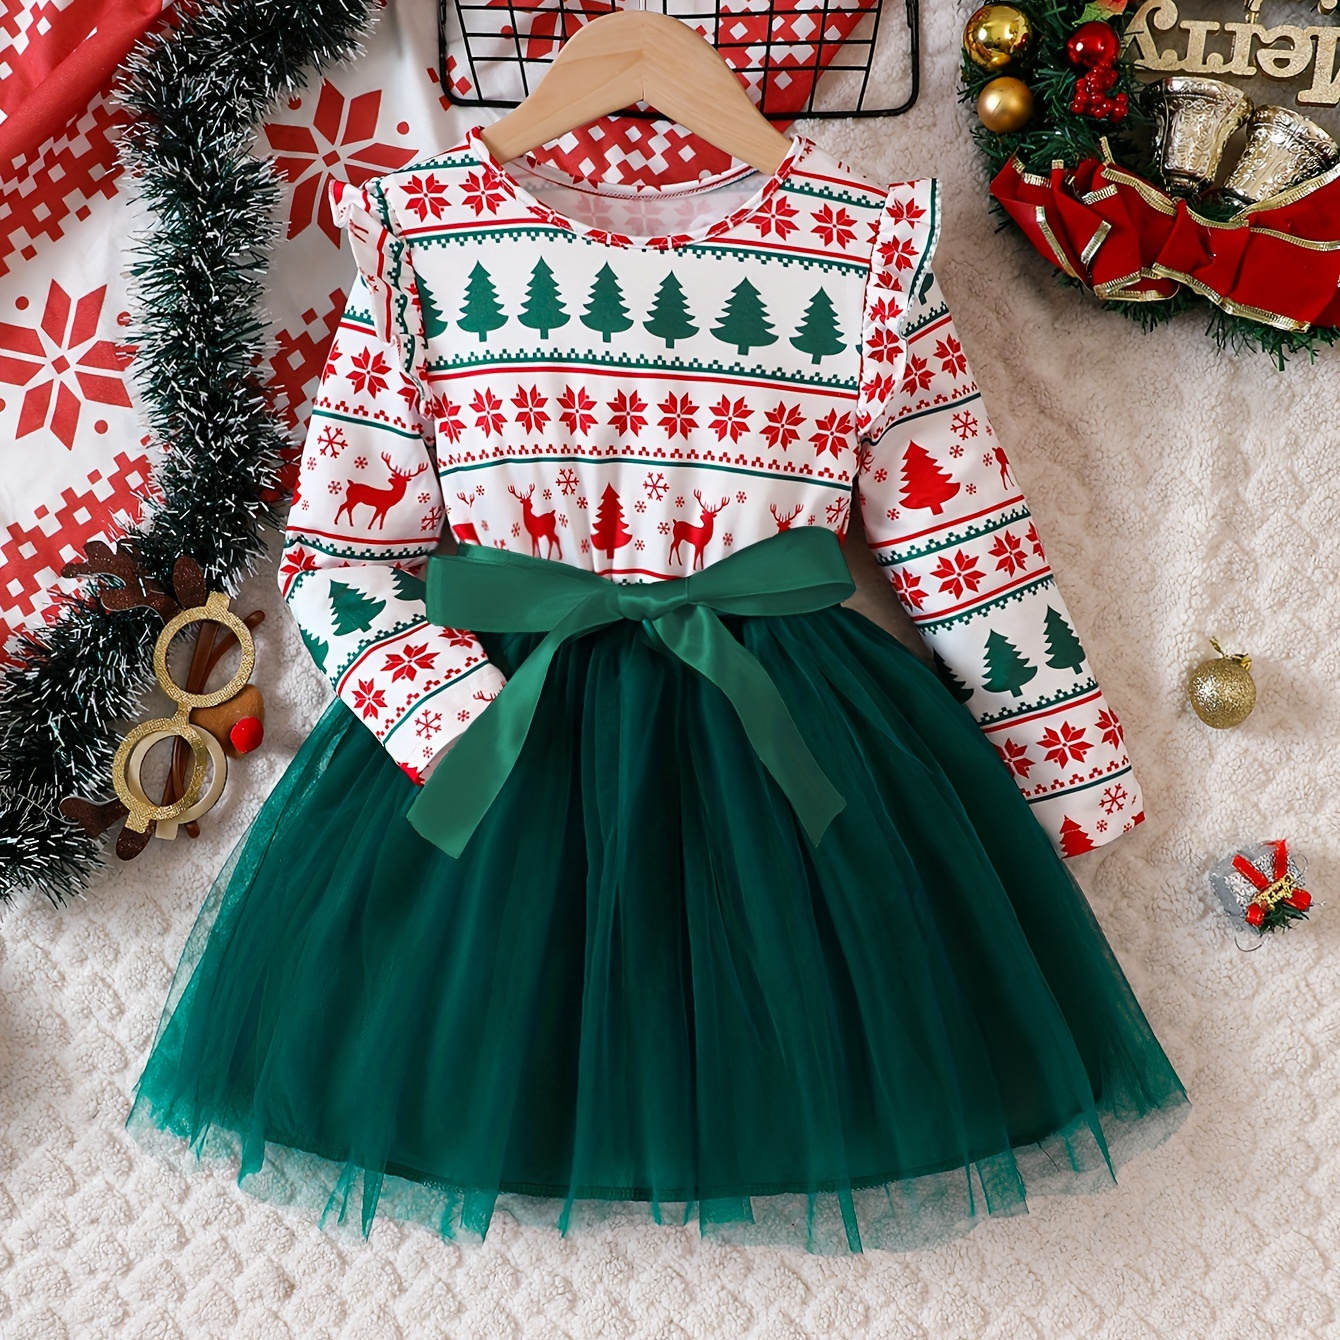 

Christmas Girls Tulle Splice Long Sleeve Tutu Dress, Cute & Smart Holiday Party Dresses Outfit For Kids/ Toddlers, Gift Choice